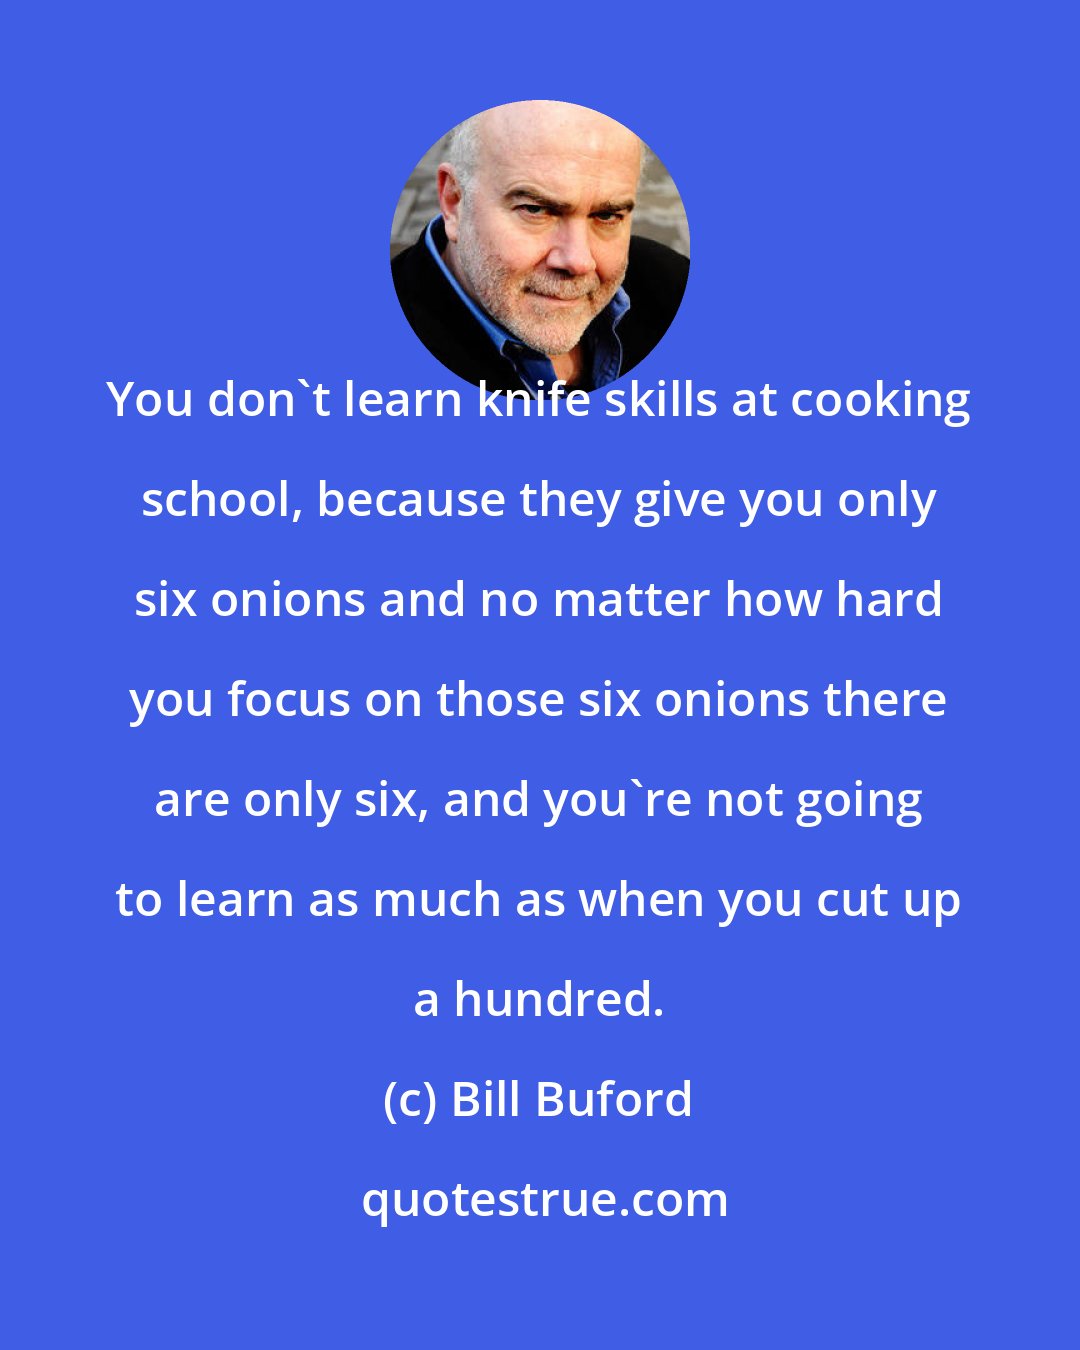 Bill Buford: You don't learn knife skills at cooking school, because they give you only six onions and no matter how hard you focus on those six onions there are only six, and you're not going to learn as much as when you cut up a hundred.